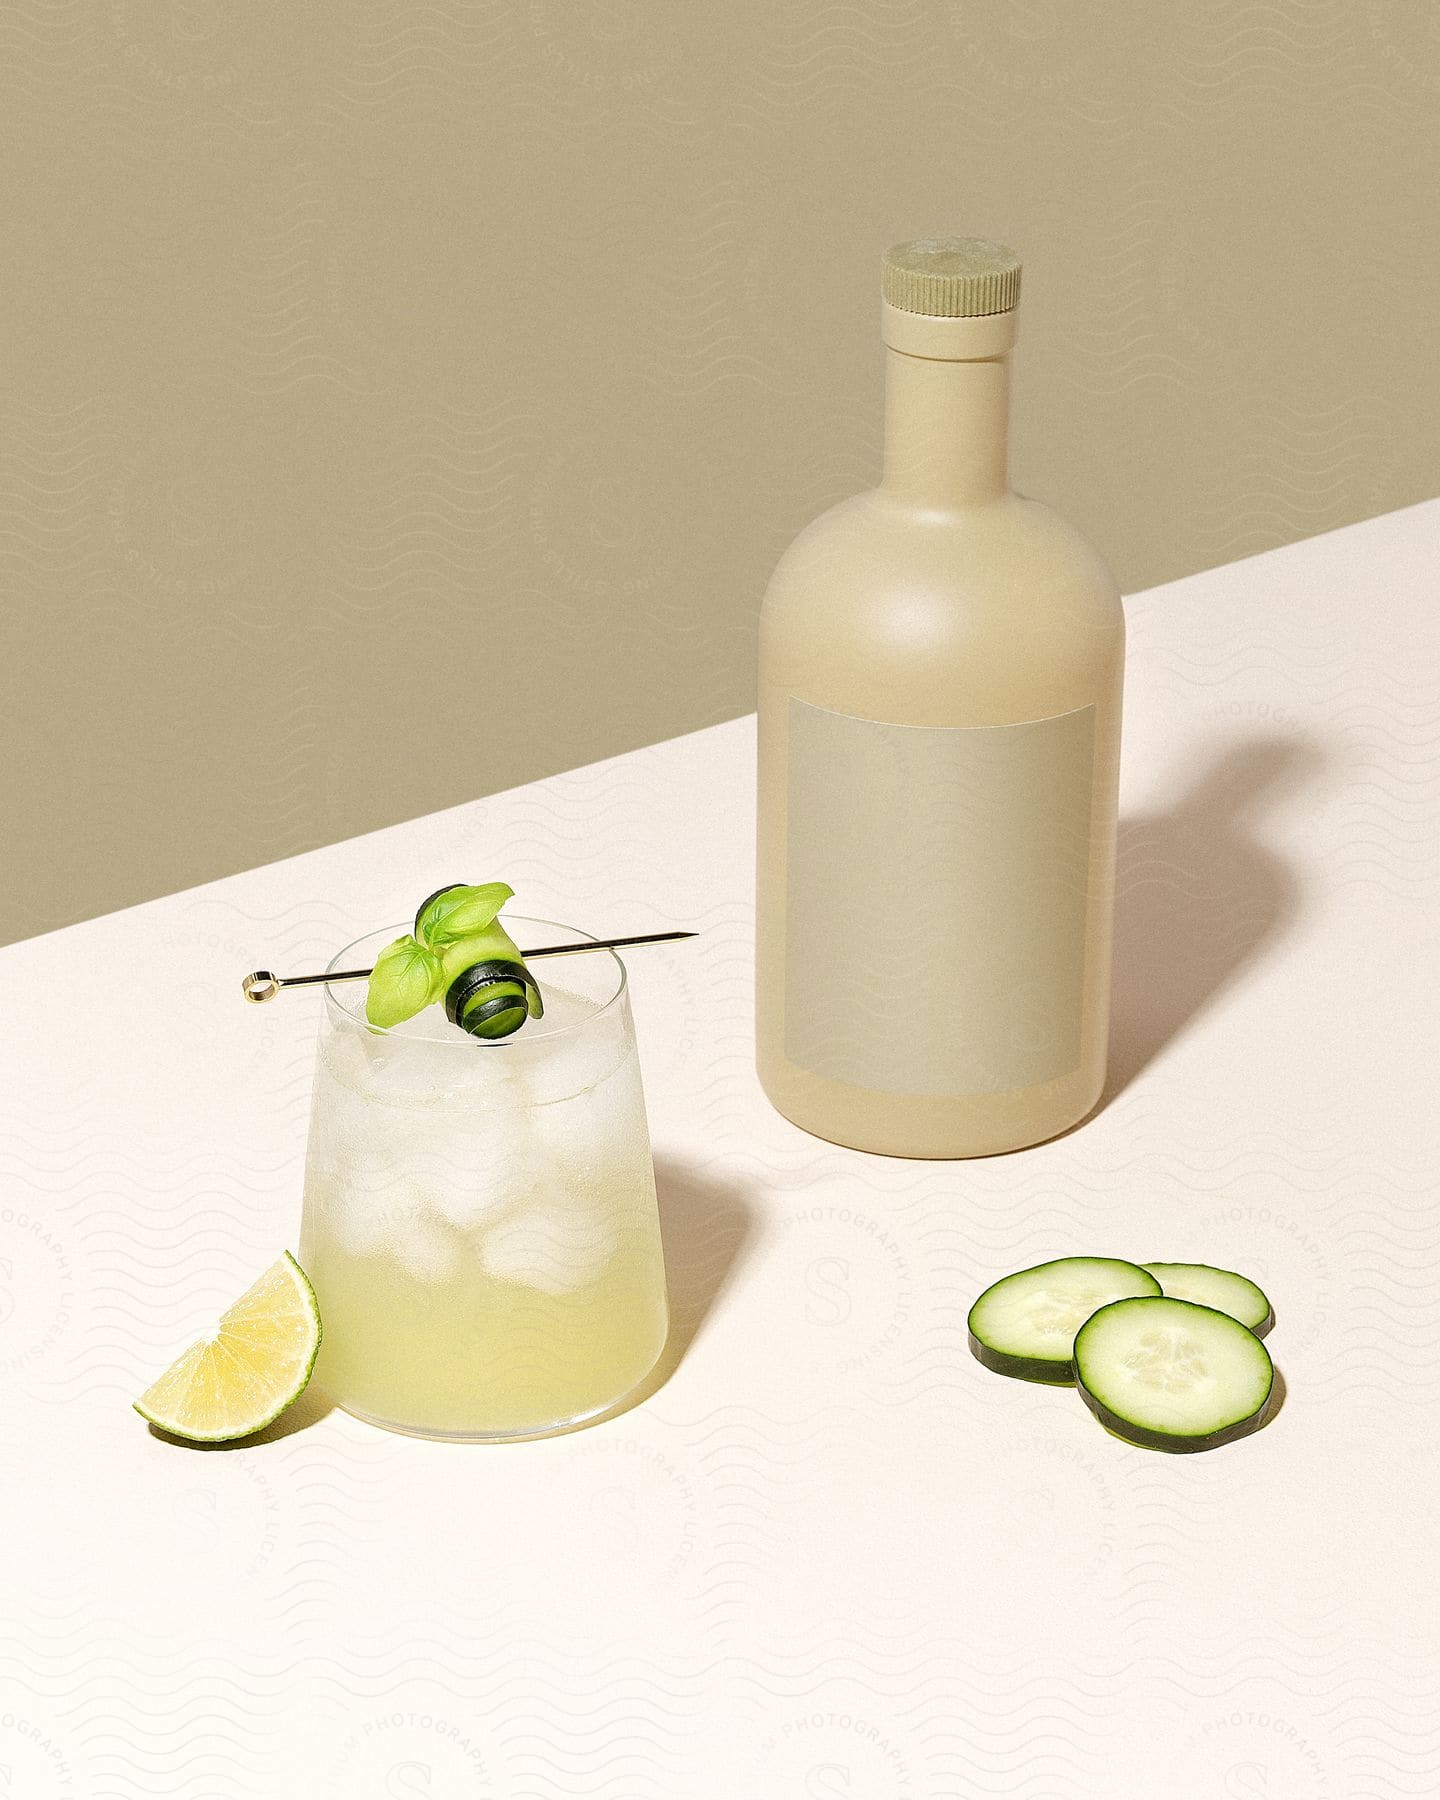 A white bottle with a frosted texture next to a glass with yellow liquid and ice and in front cucumber slices.